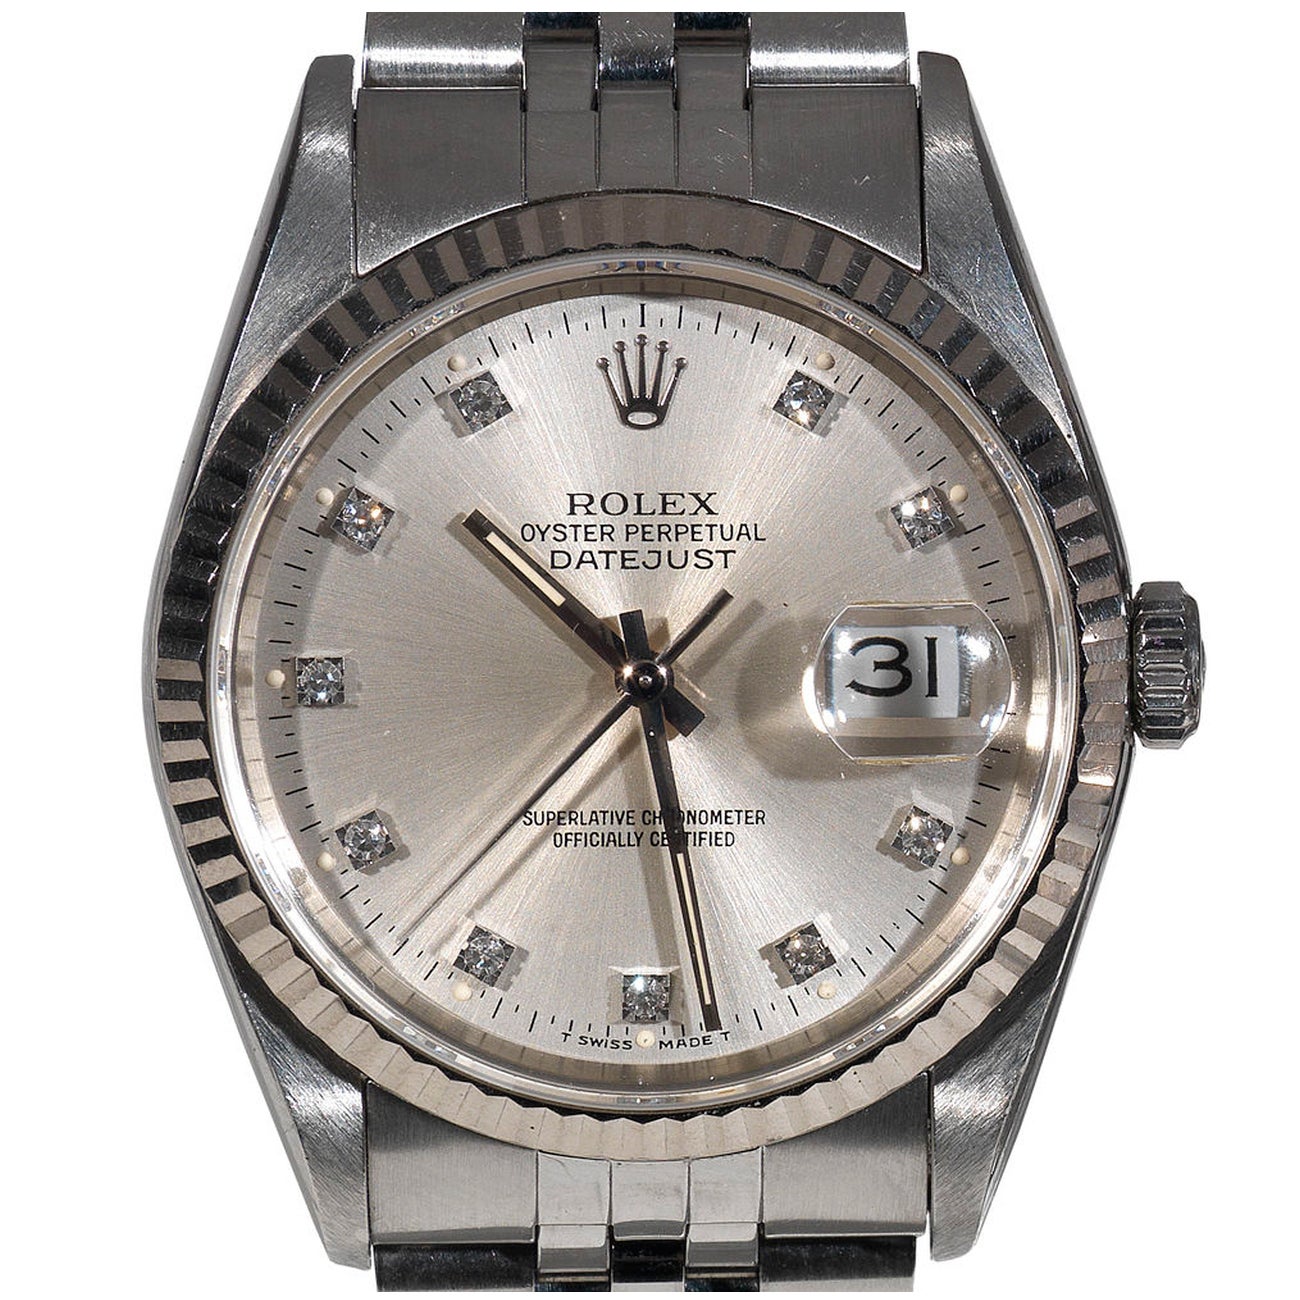 1992 Rolex Oyster Perpetual Datejust - For Sale on 1stDibs | rolex oyster  perpetual datejust 1992, rolex oyster perpetual 1992 price